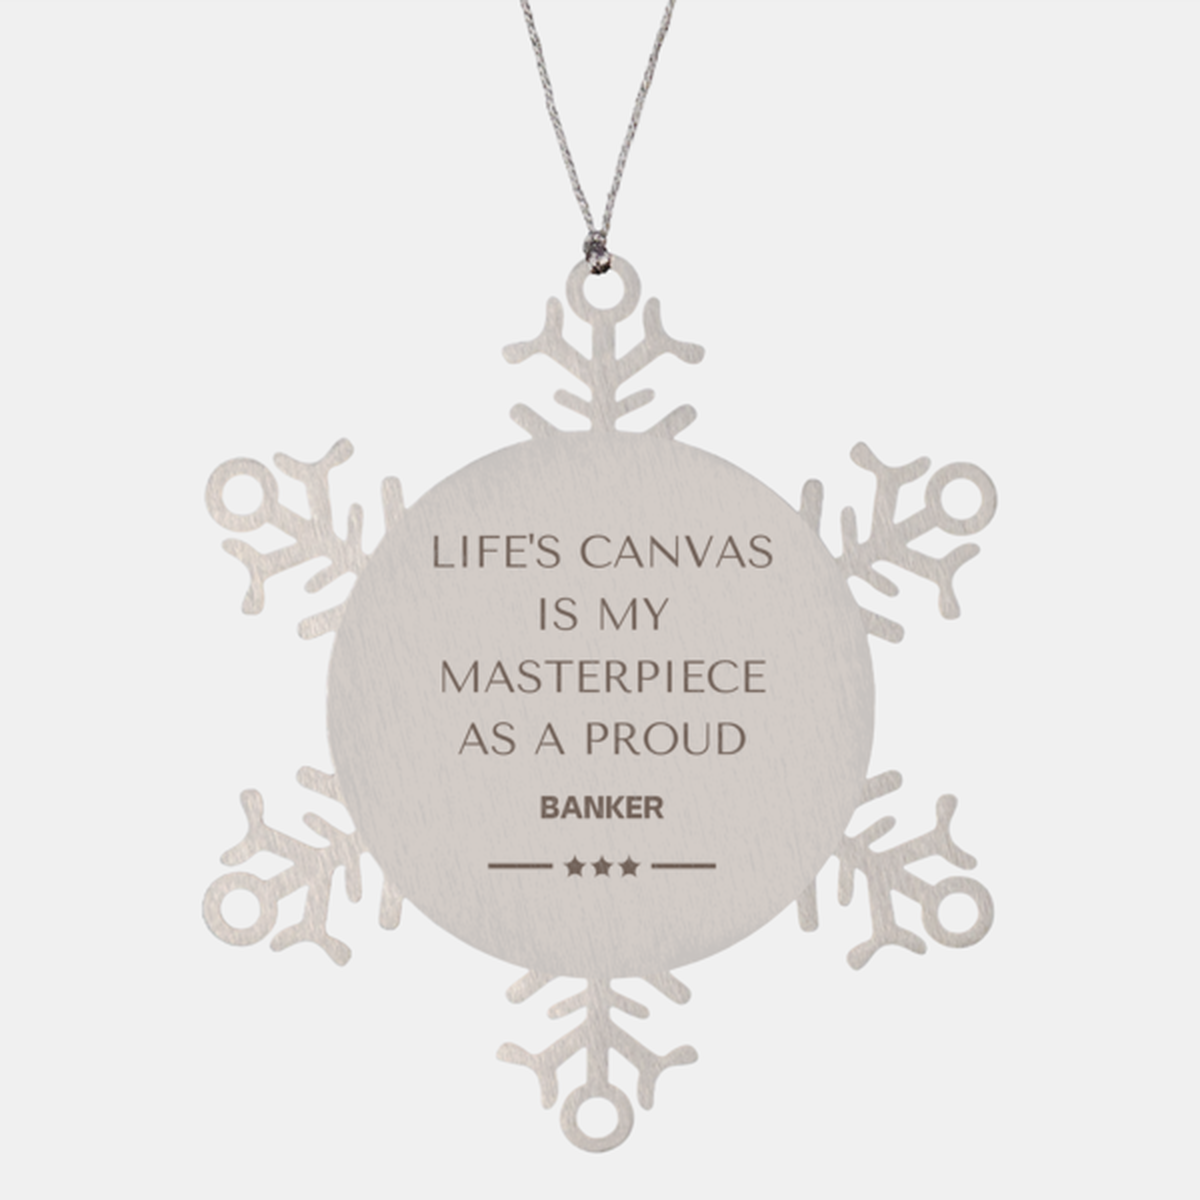 Proud Banker Gifts, Life's canvas is my masterpiece, Epic Birthday Christmas Unique Snowflake Ornament For Banker, Coworkers, Men, Women, Friends